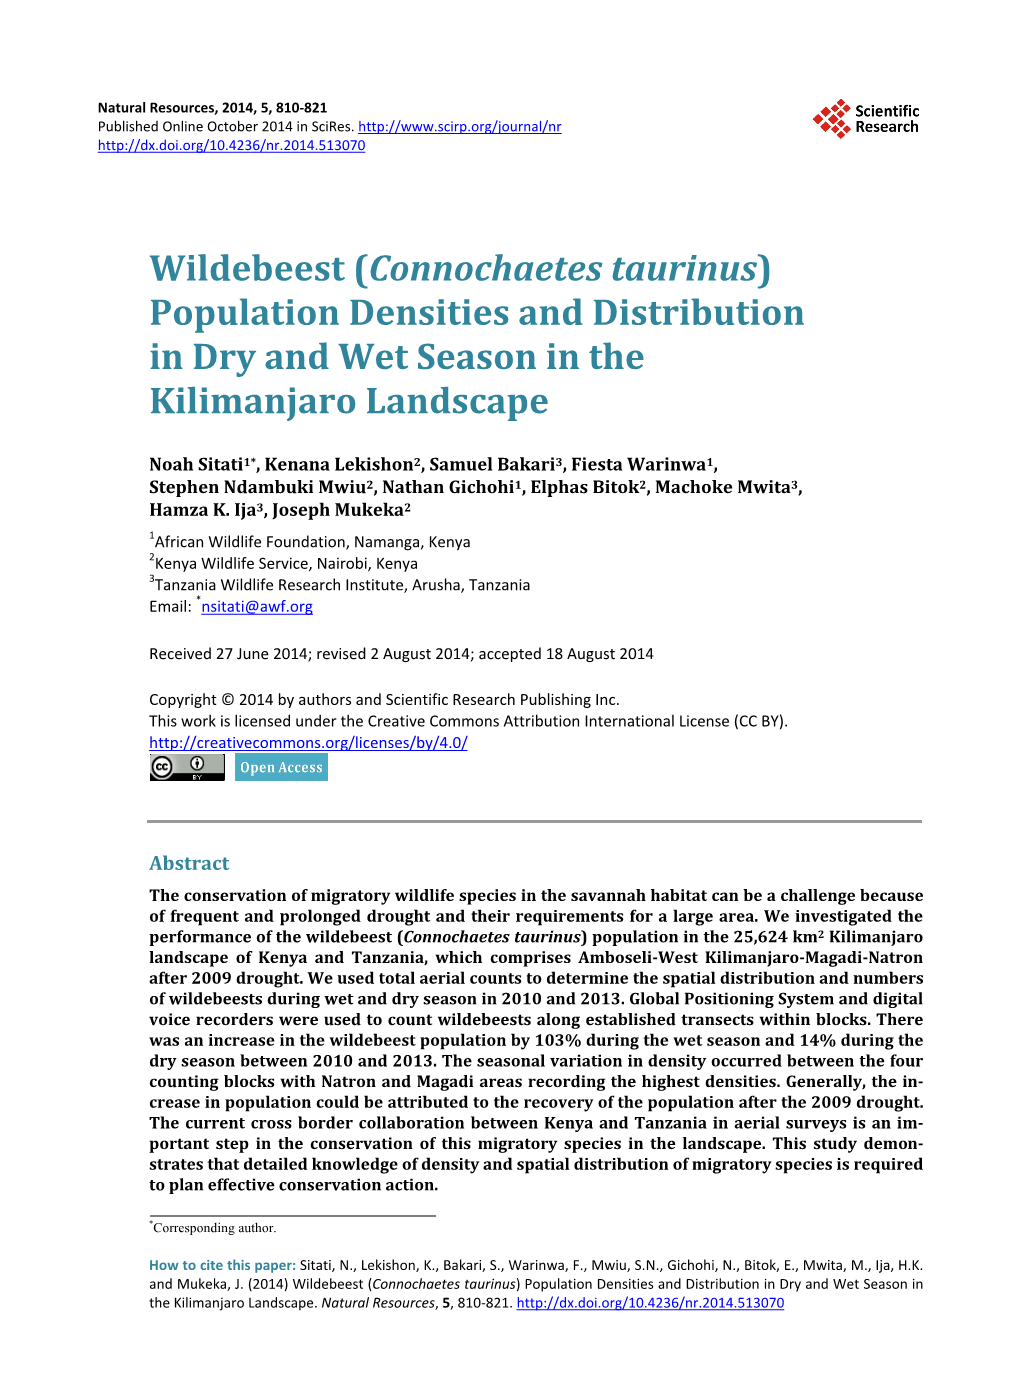 Wildebeest (Connochaetes Taurinus) Population Densities and Distribution in Dry and Wet Season in the Kilimanjaro Landscape